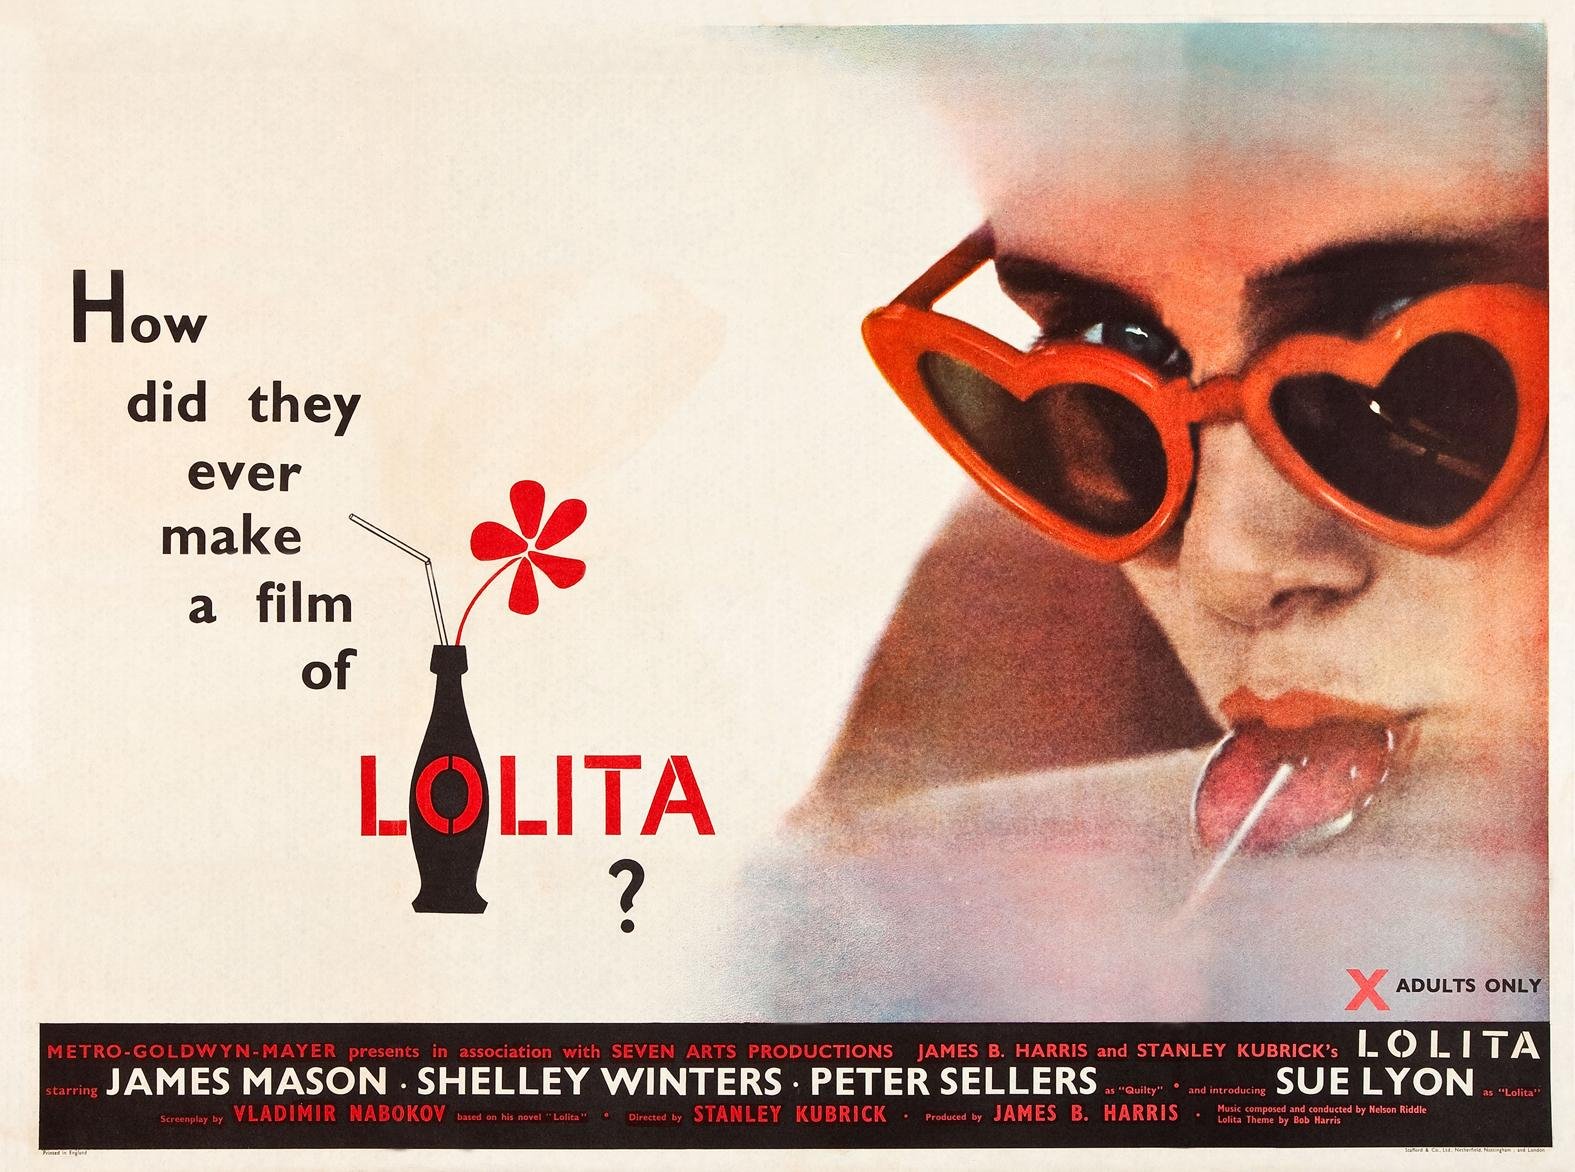 Stanley Kubrick Lolita Controversial Themes 1680648305717